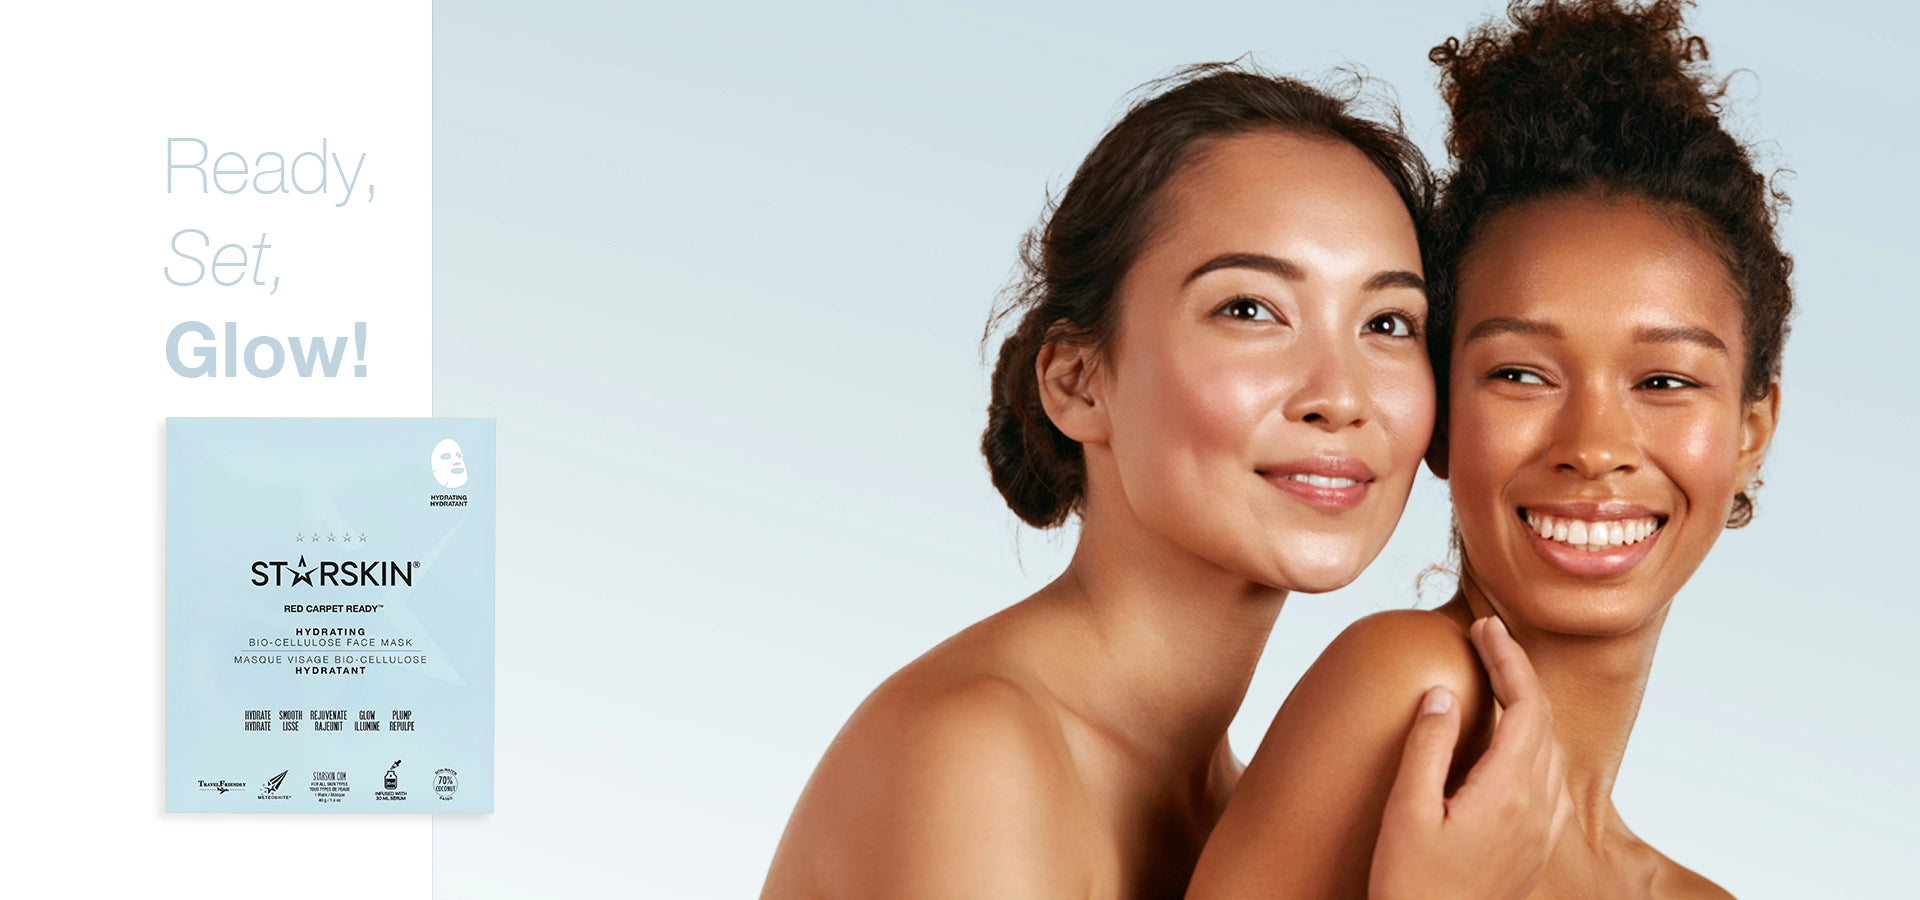 Main banner showing two women and promoting the Red Carpet Ready Facial mask